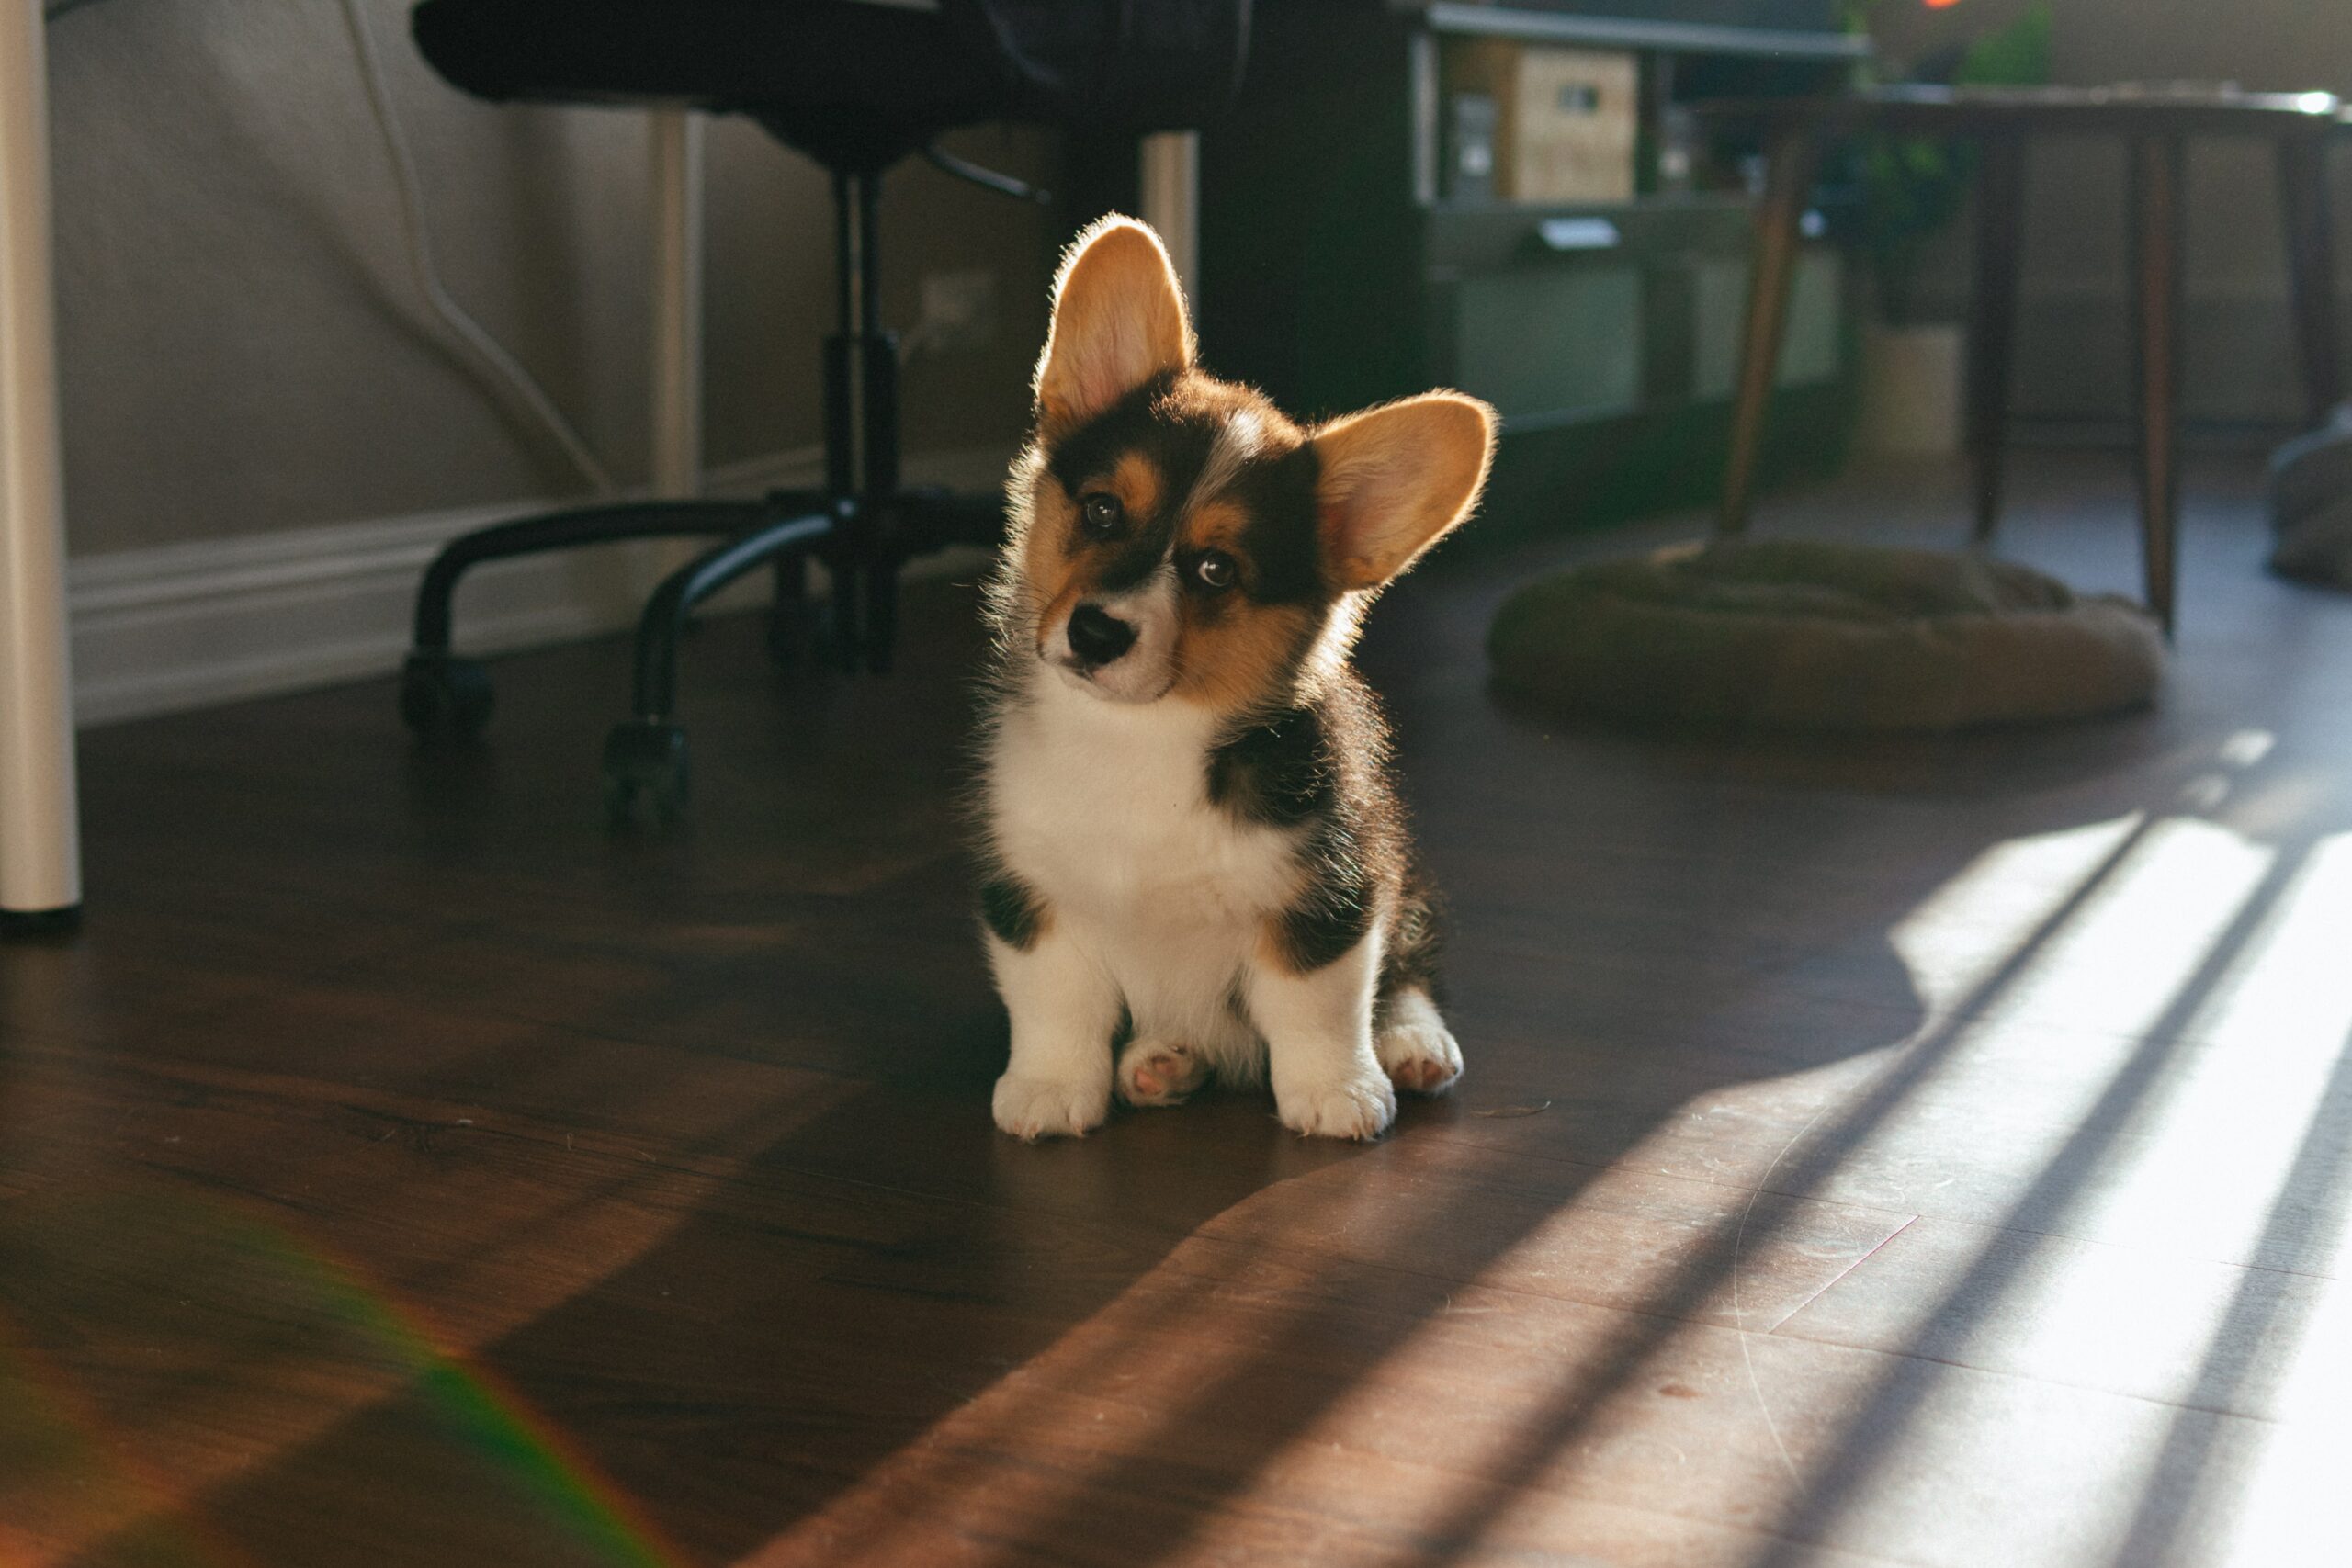 Seven Questions To Ask Before Bringing Home a New Puppy